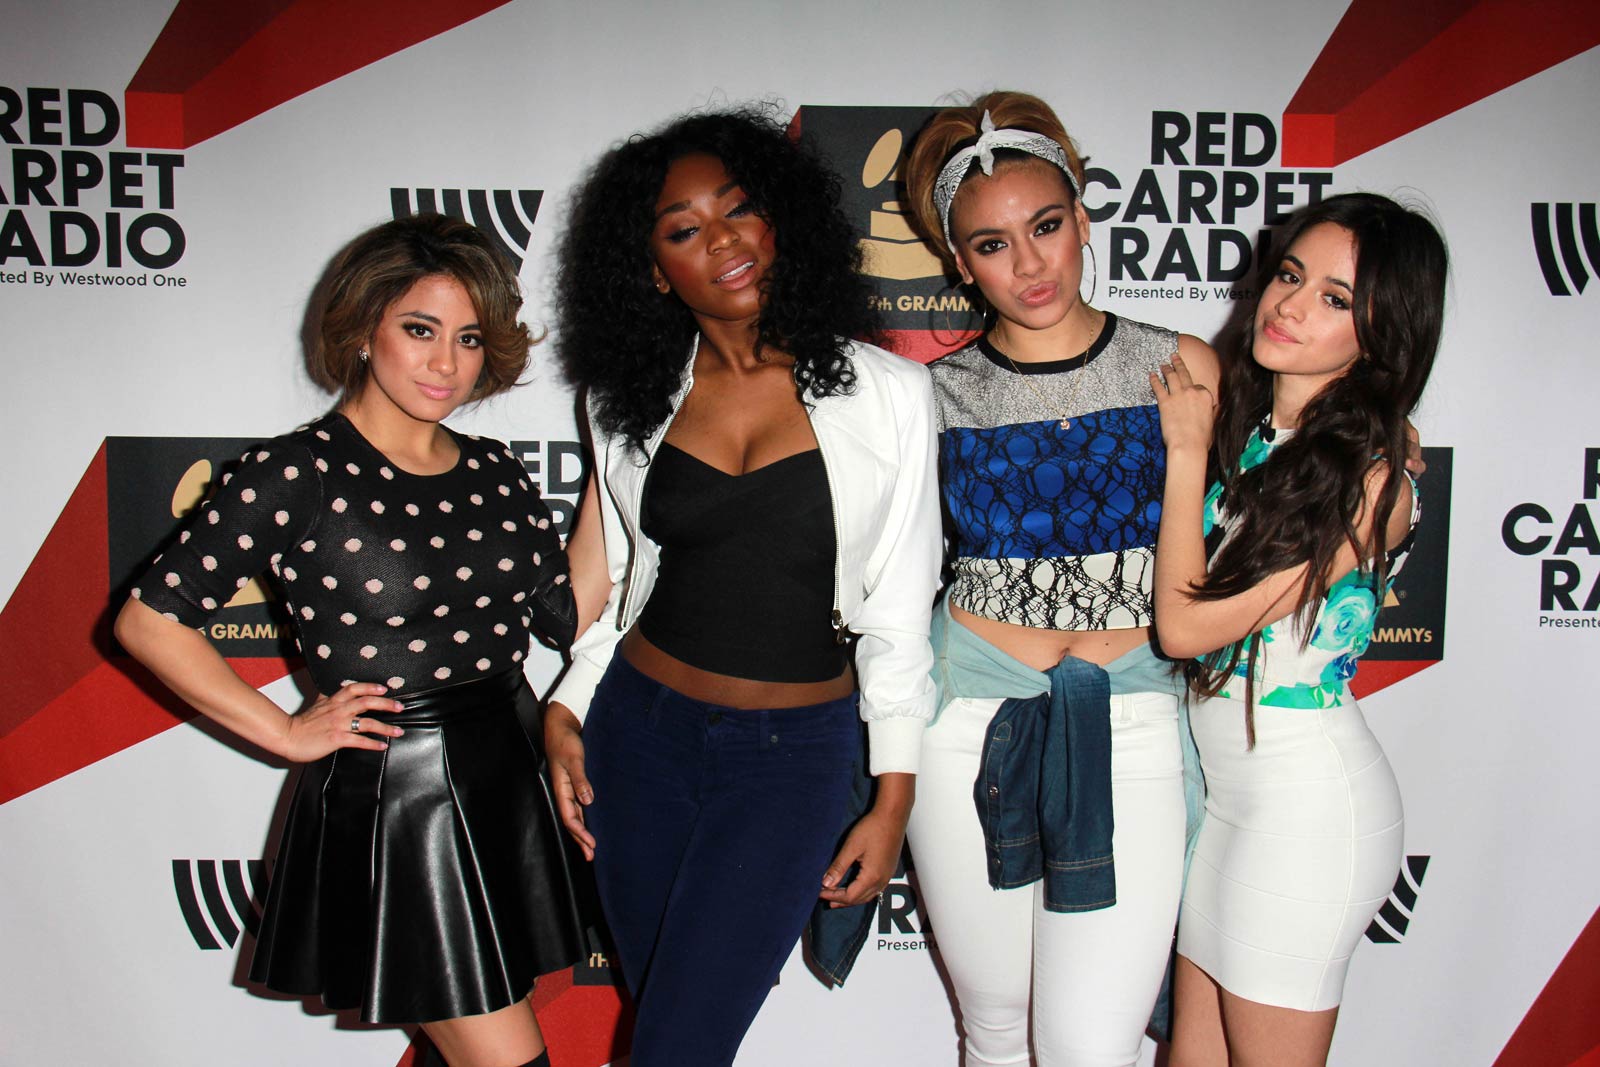 Fifth Harmony at Red Carpet Radio in Los Angeles